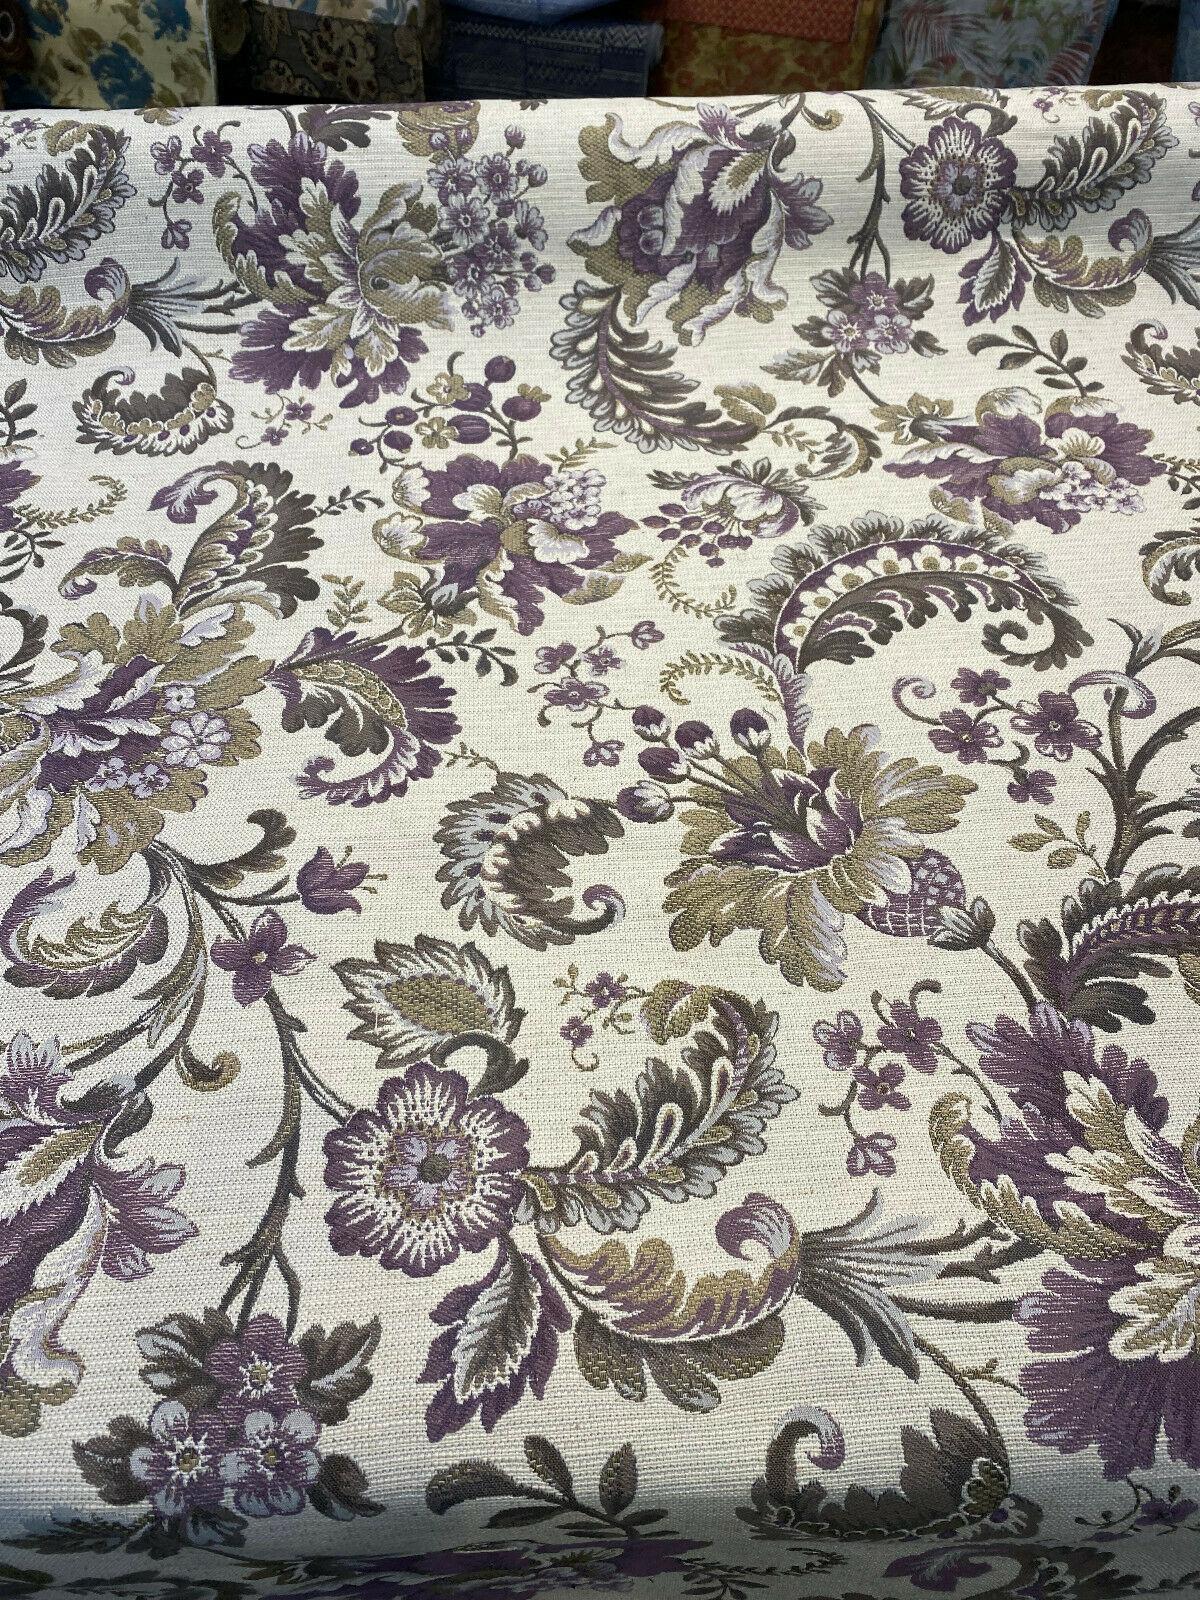 Razzmatazz Stripe Purple Chenille Tapestry Upholstery Fabric by The Yard :  Arts, Crafts & Sewing 